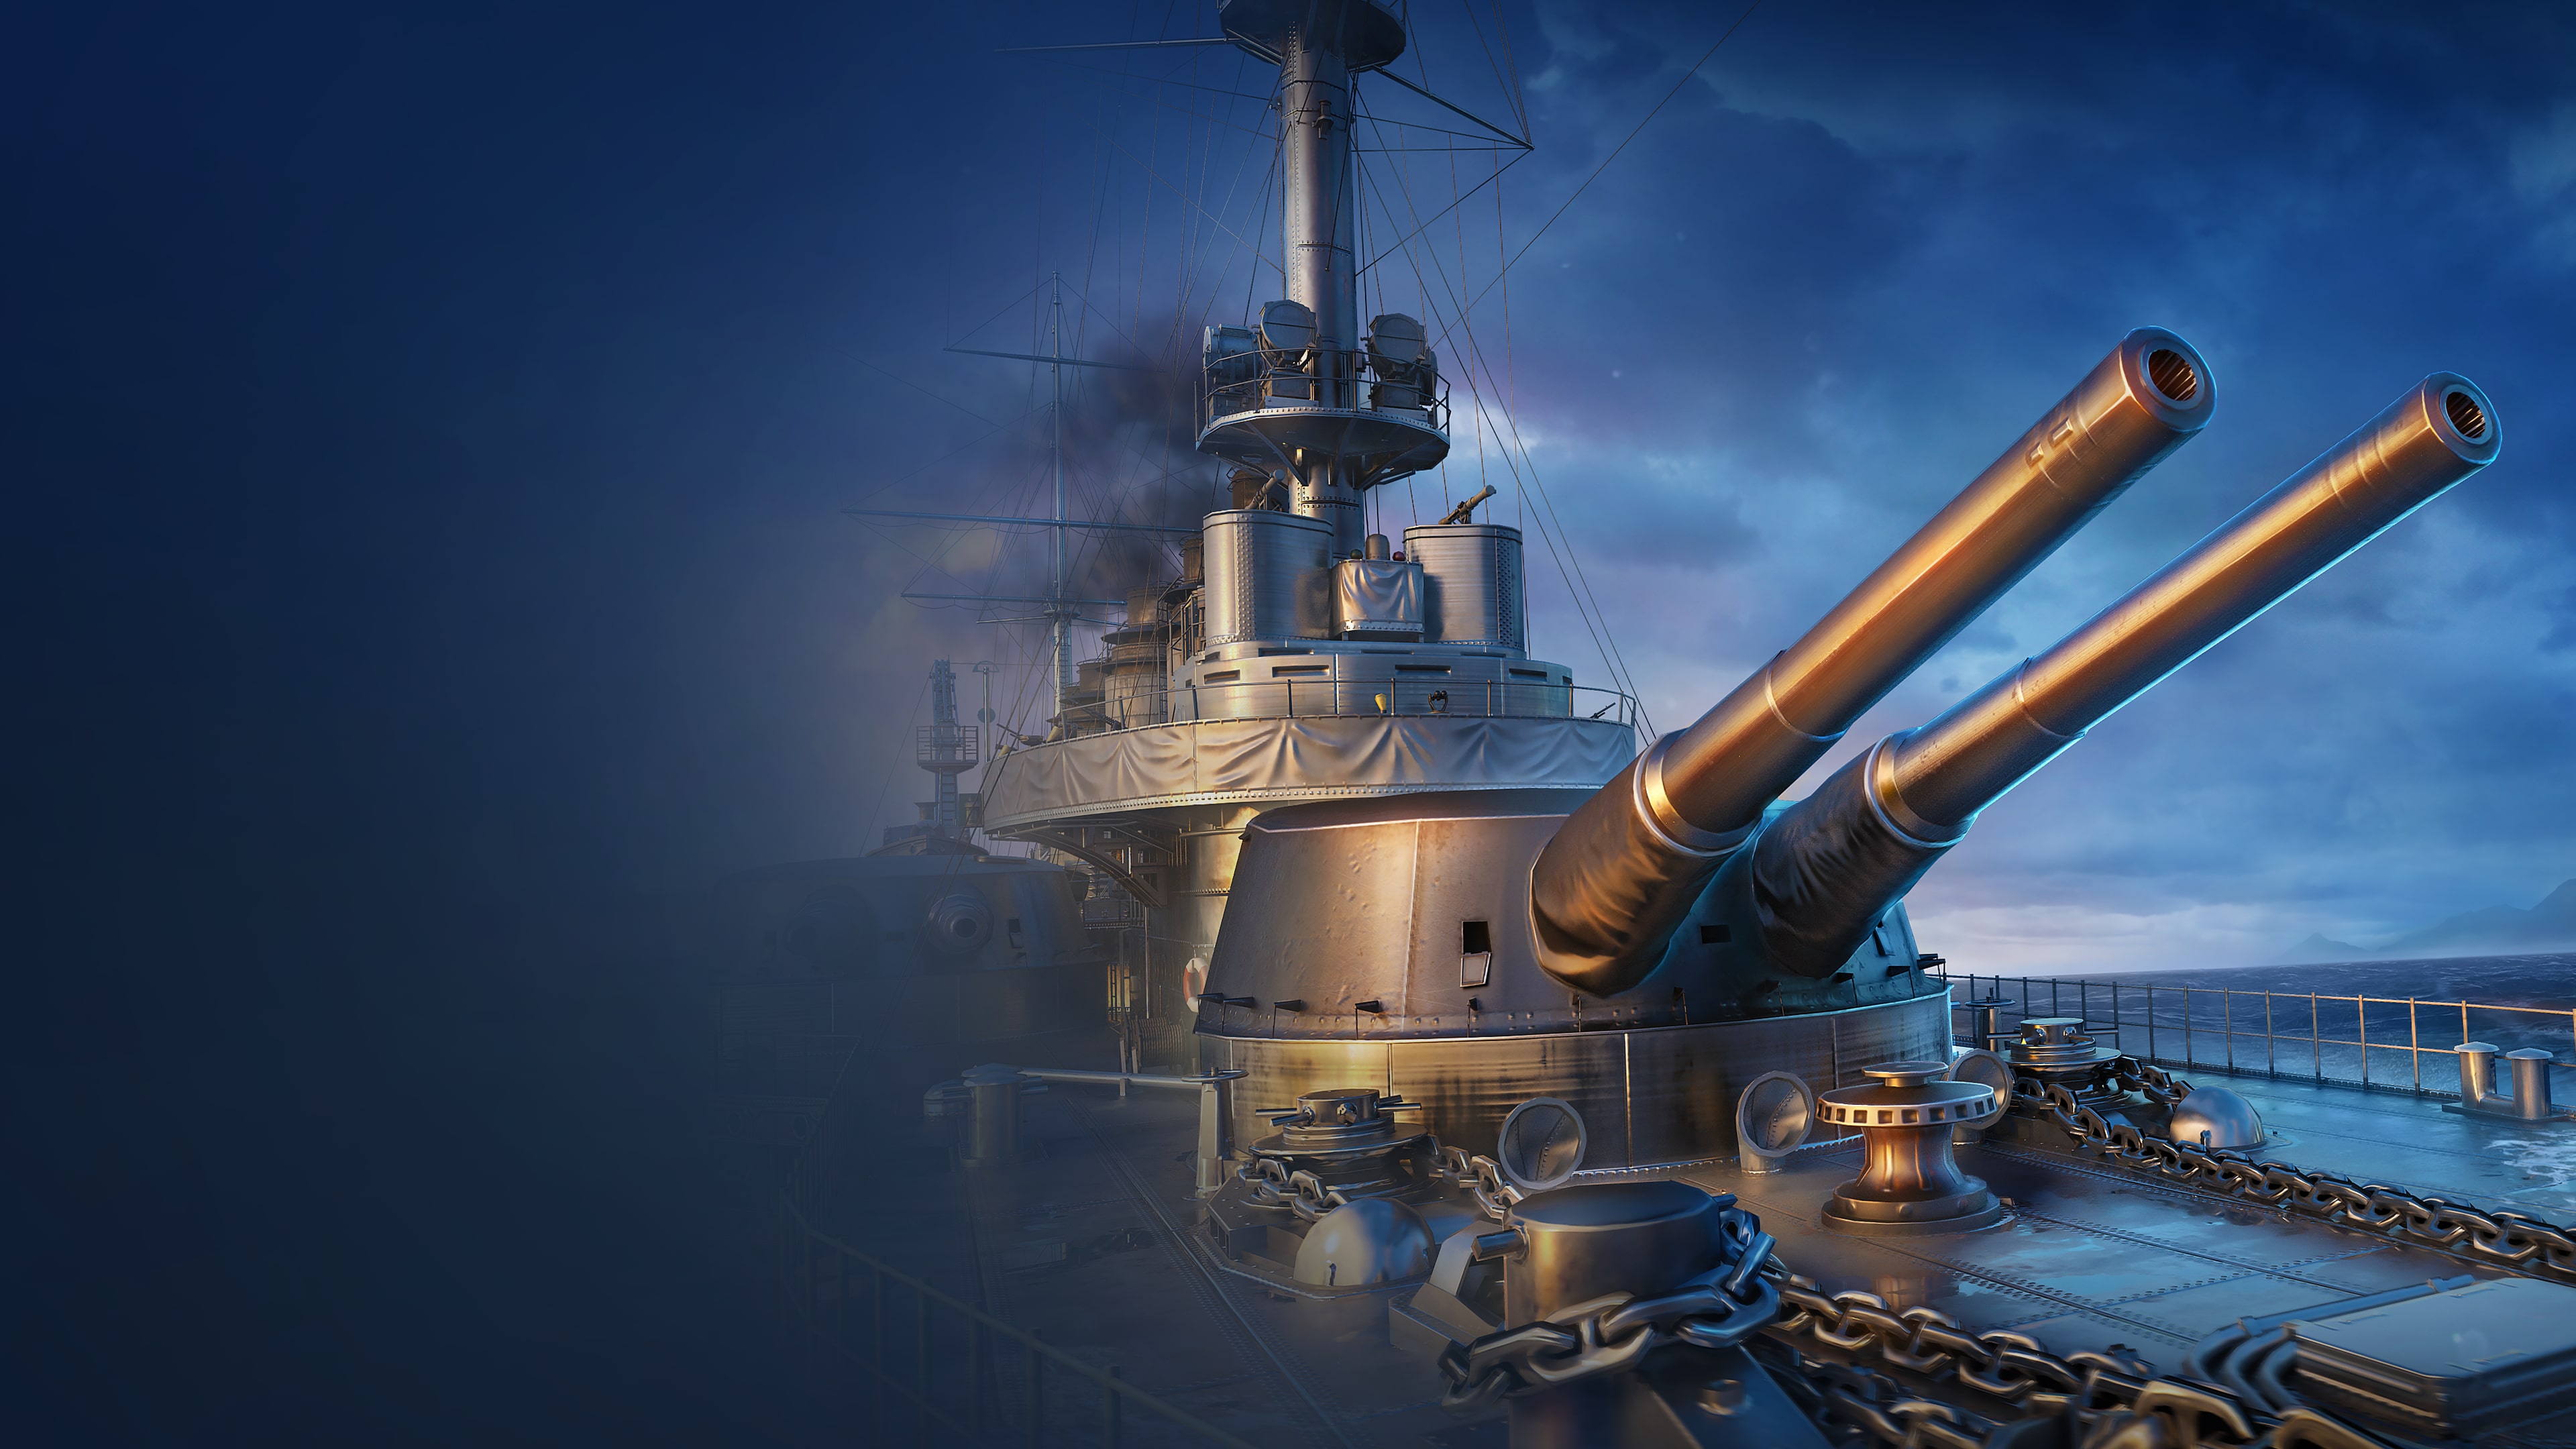 World of Warships: Legends — PS5 Mythical Might